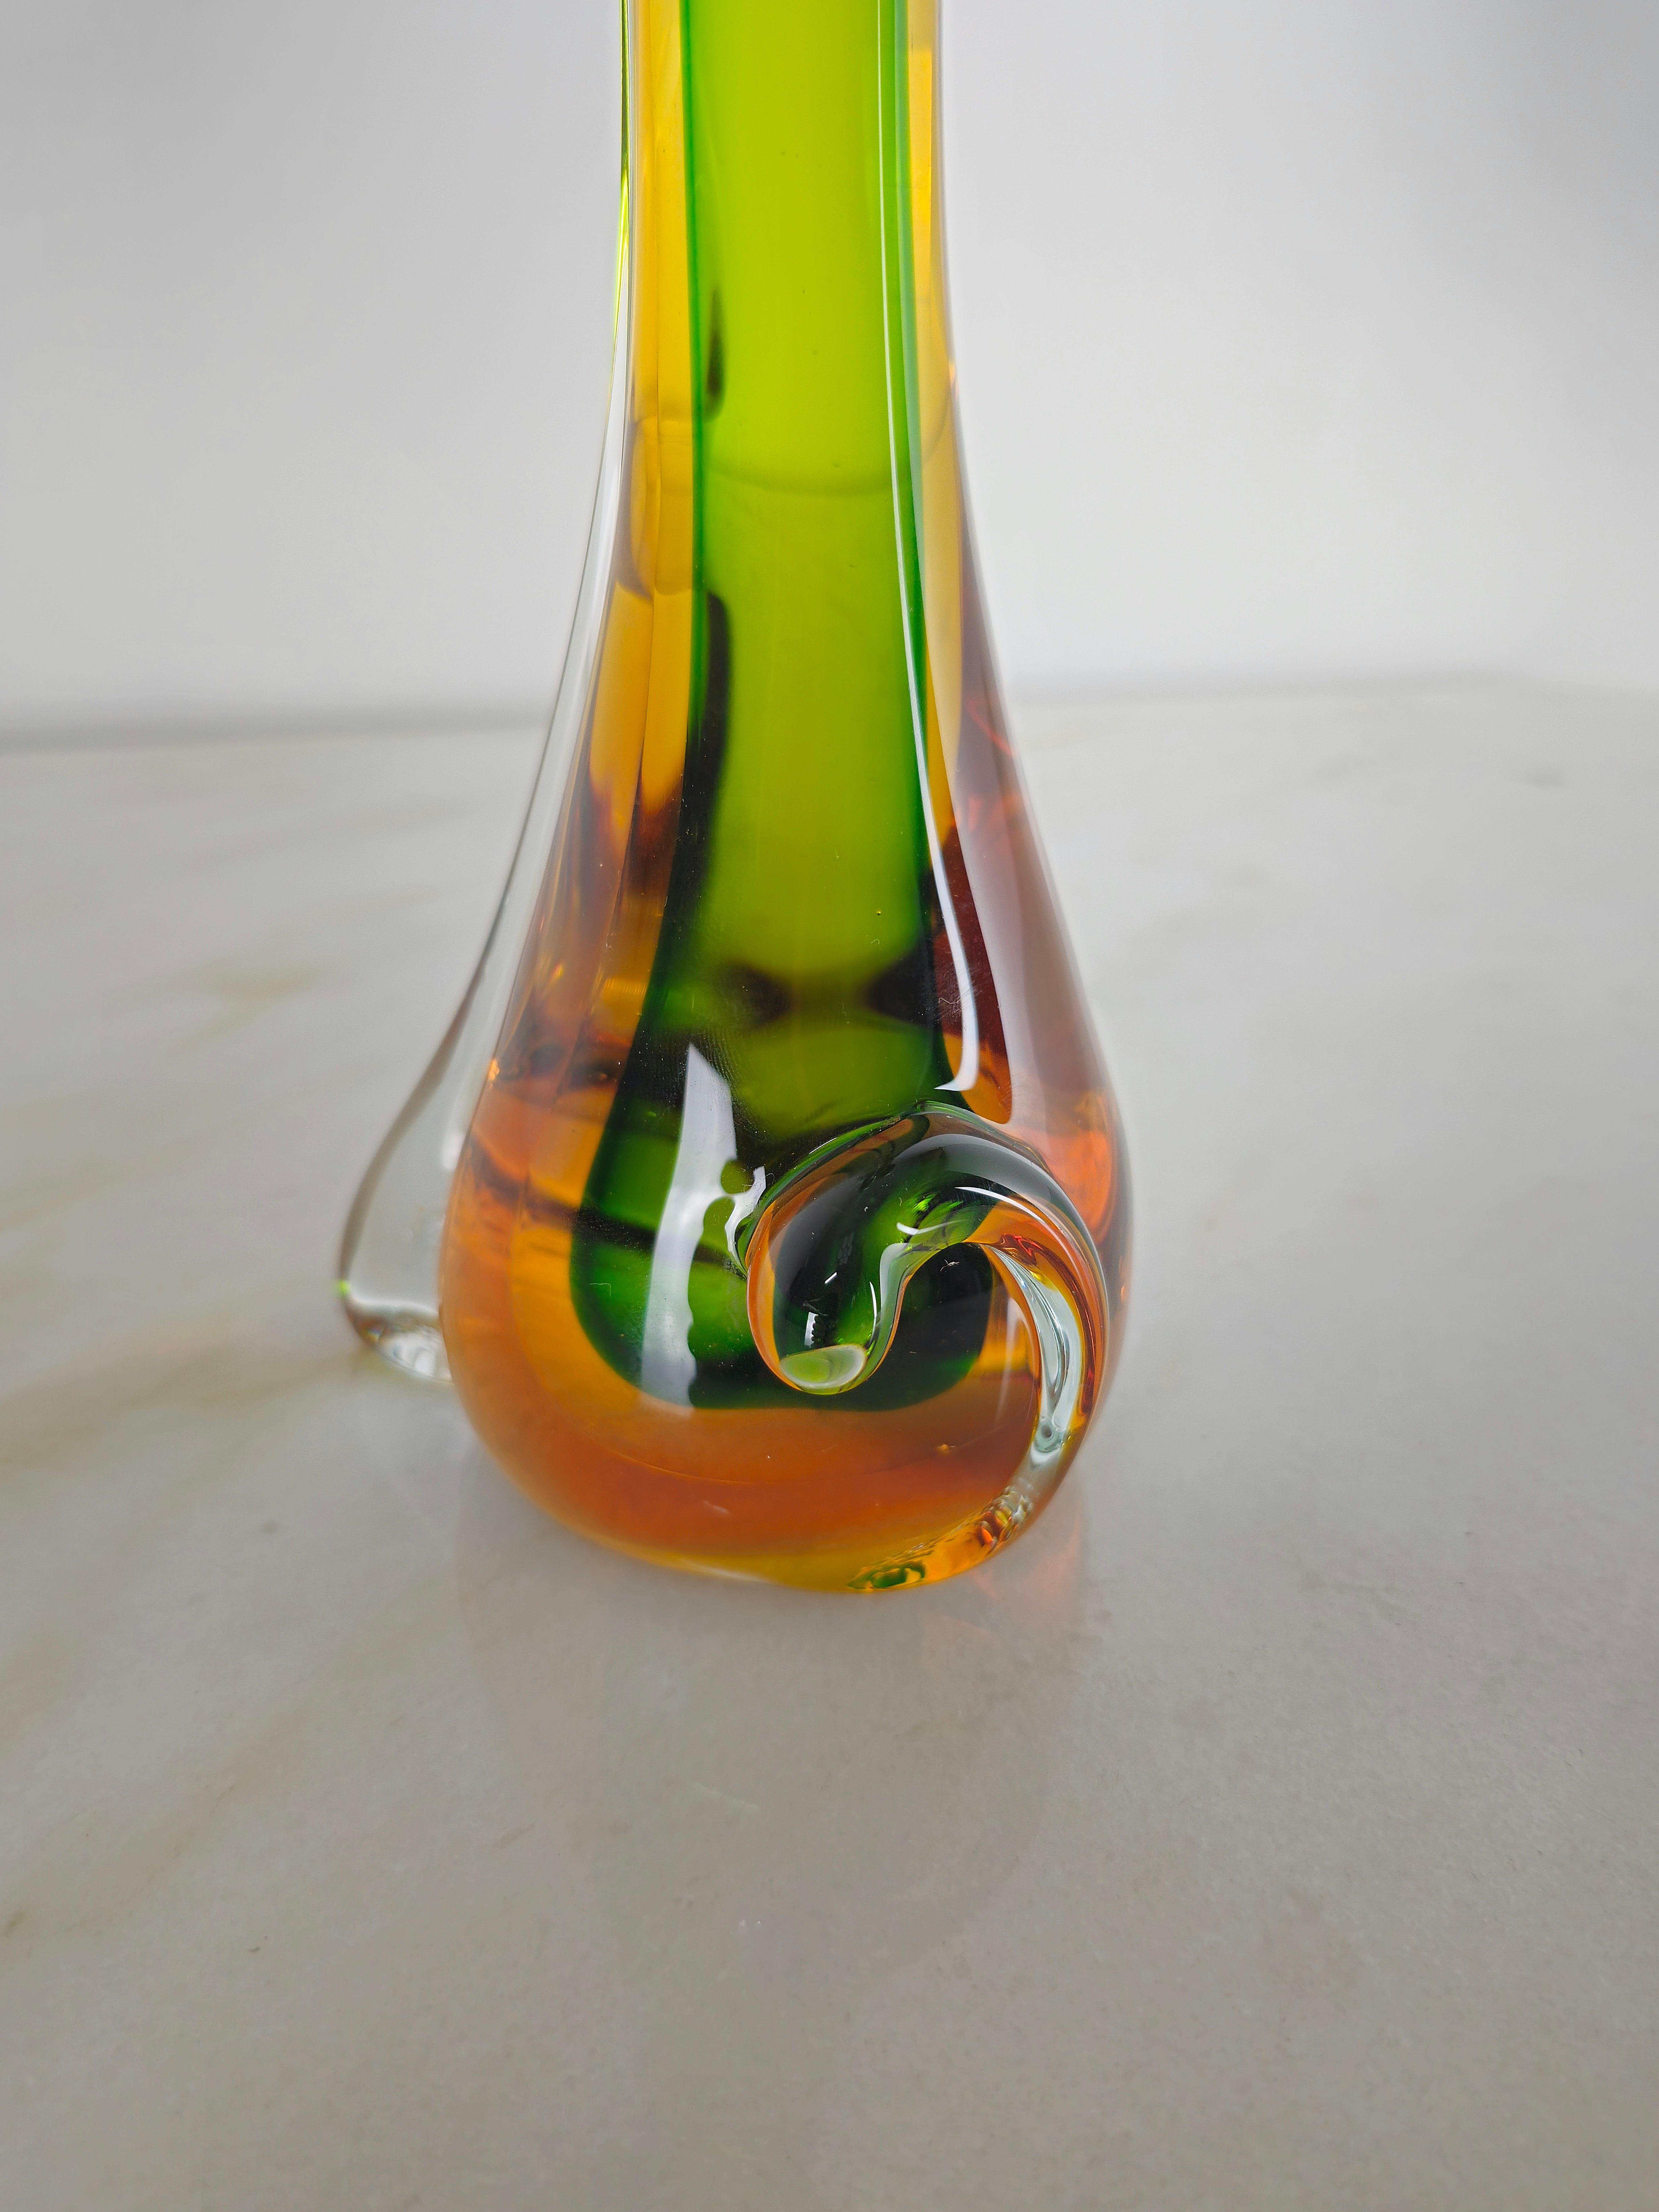 Decorative Object Animal Sculpture Dog Murano Glass Midcentury Modern Italy 1960 In Good Condition For Sale In Palermo, IT